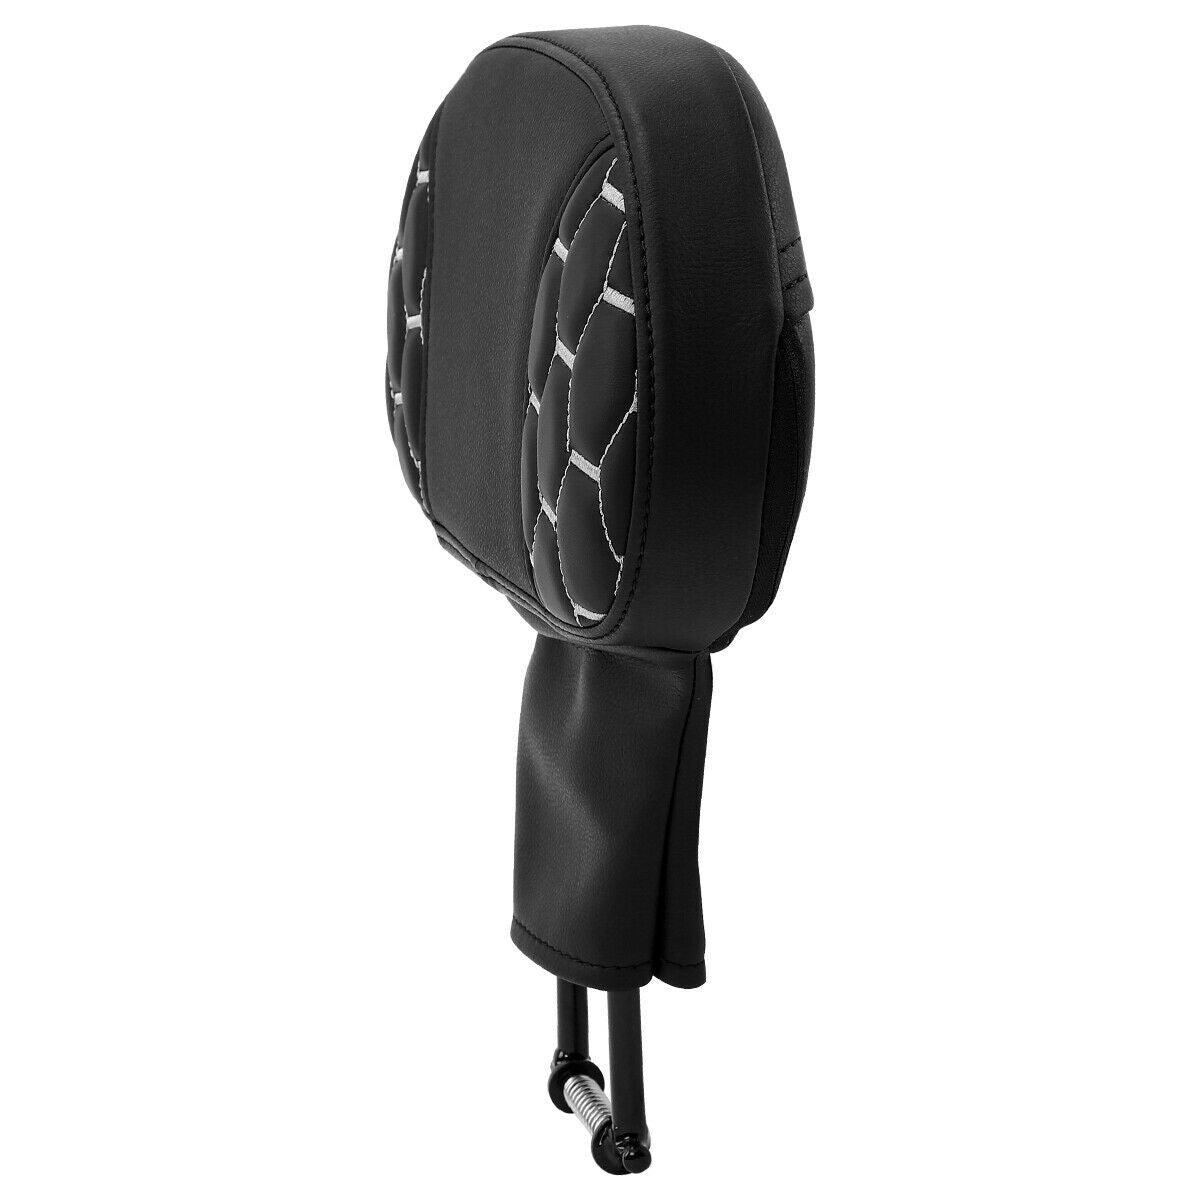 Driver Rider Backrest Fit For Harley Touring Road King Street Electra Glide FLHT - Moto Life Products